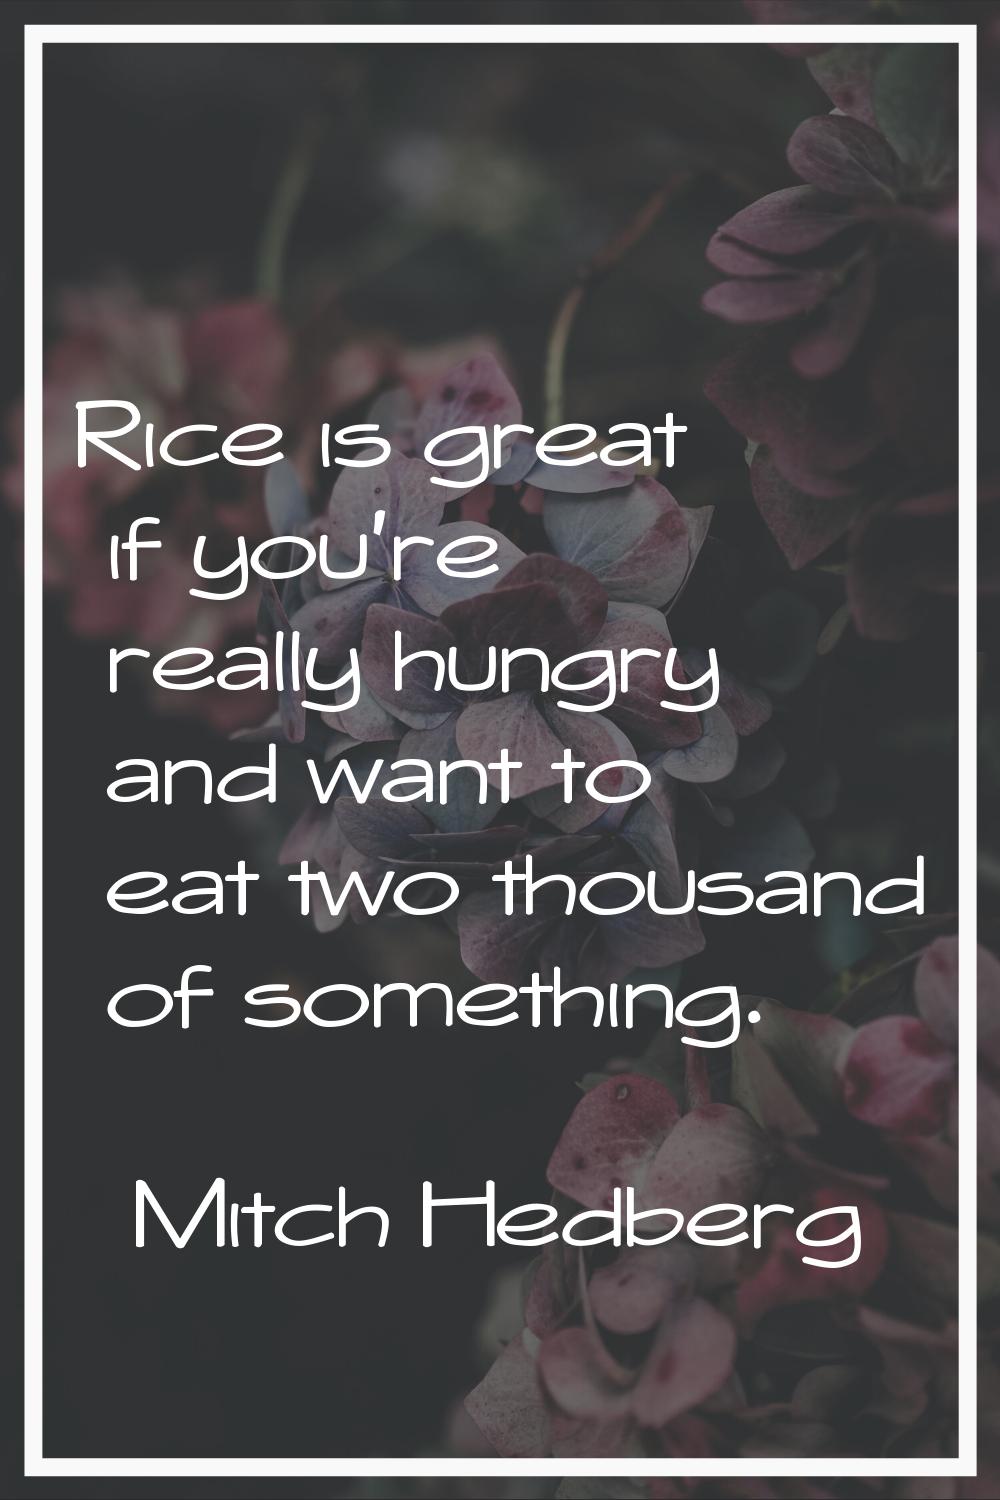 Rice is great if you're really hungry and want to eat two thousand of something.